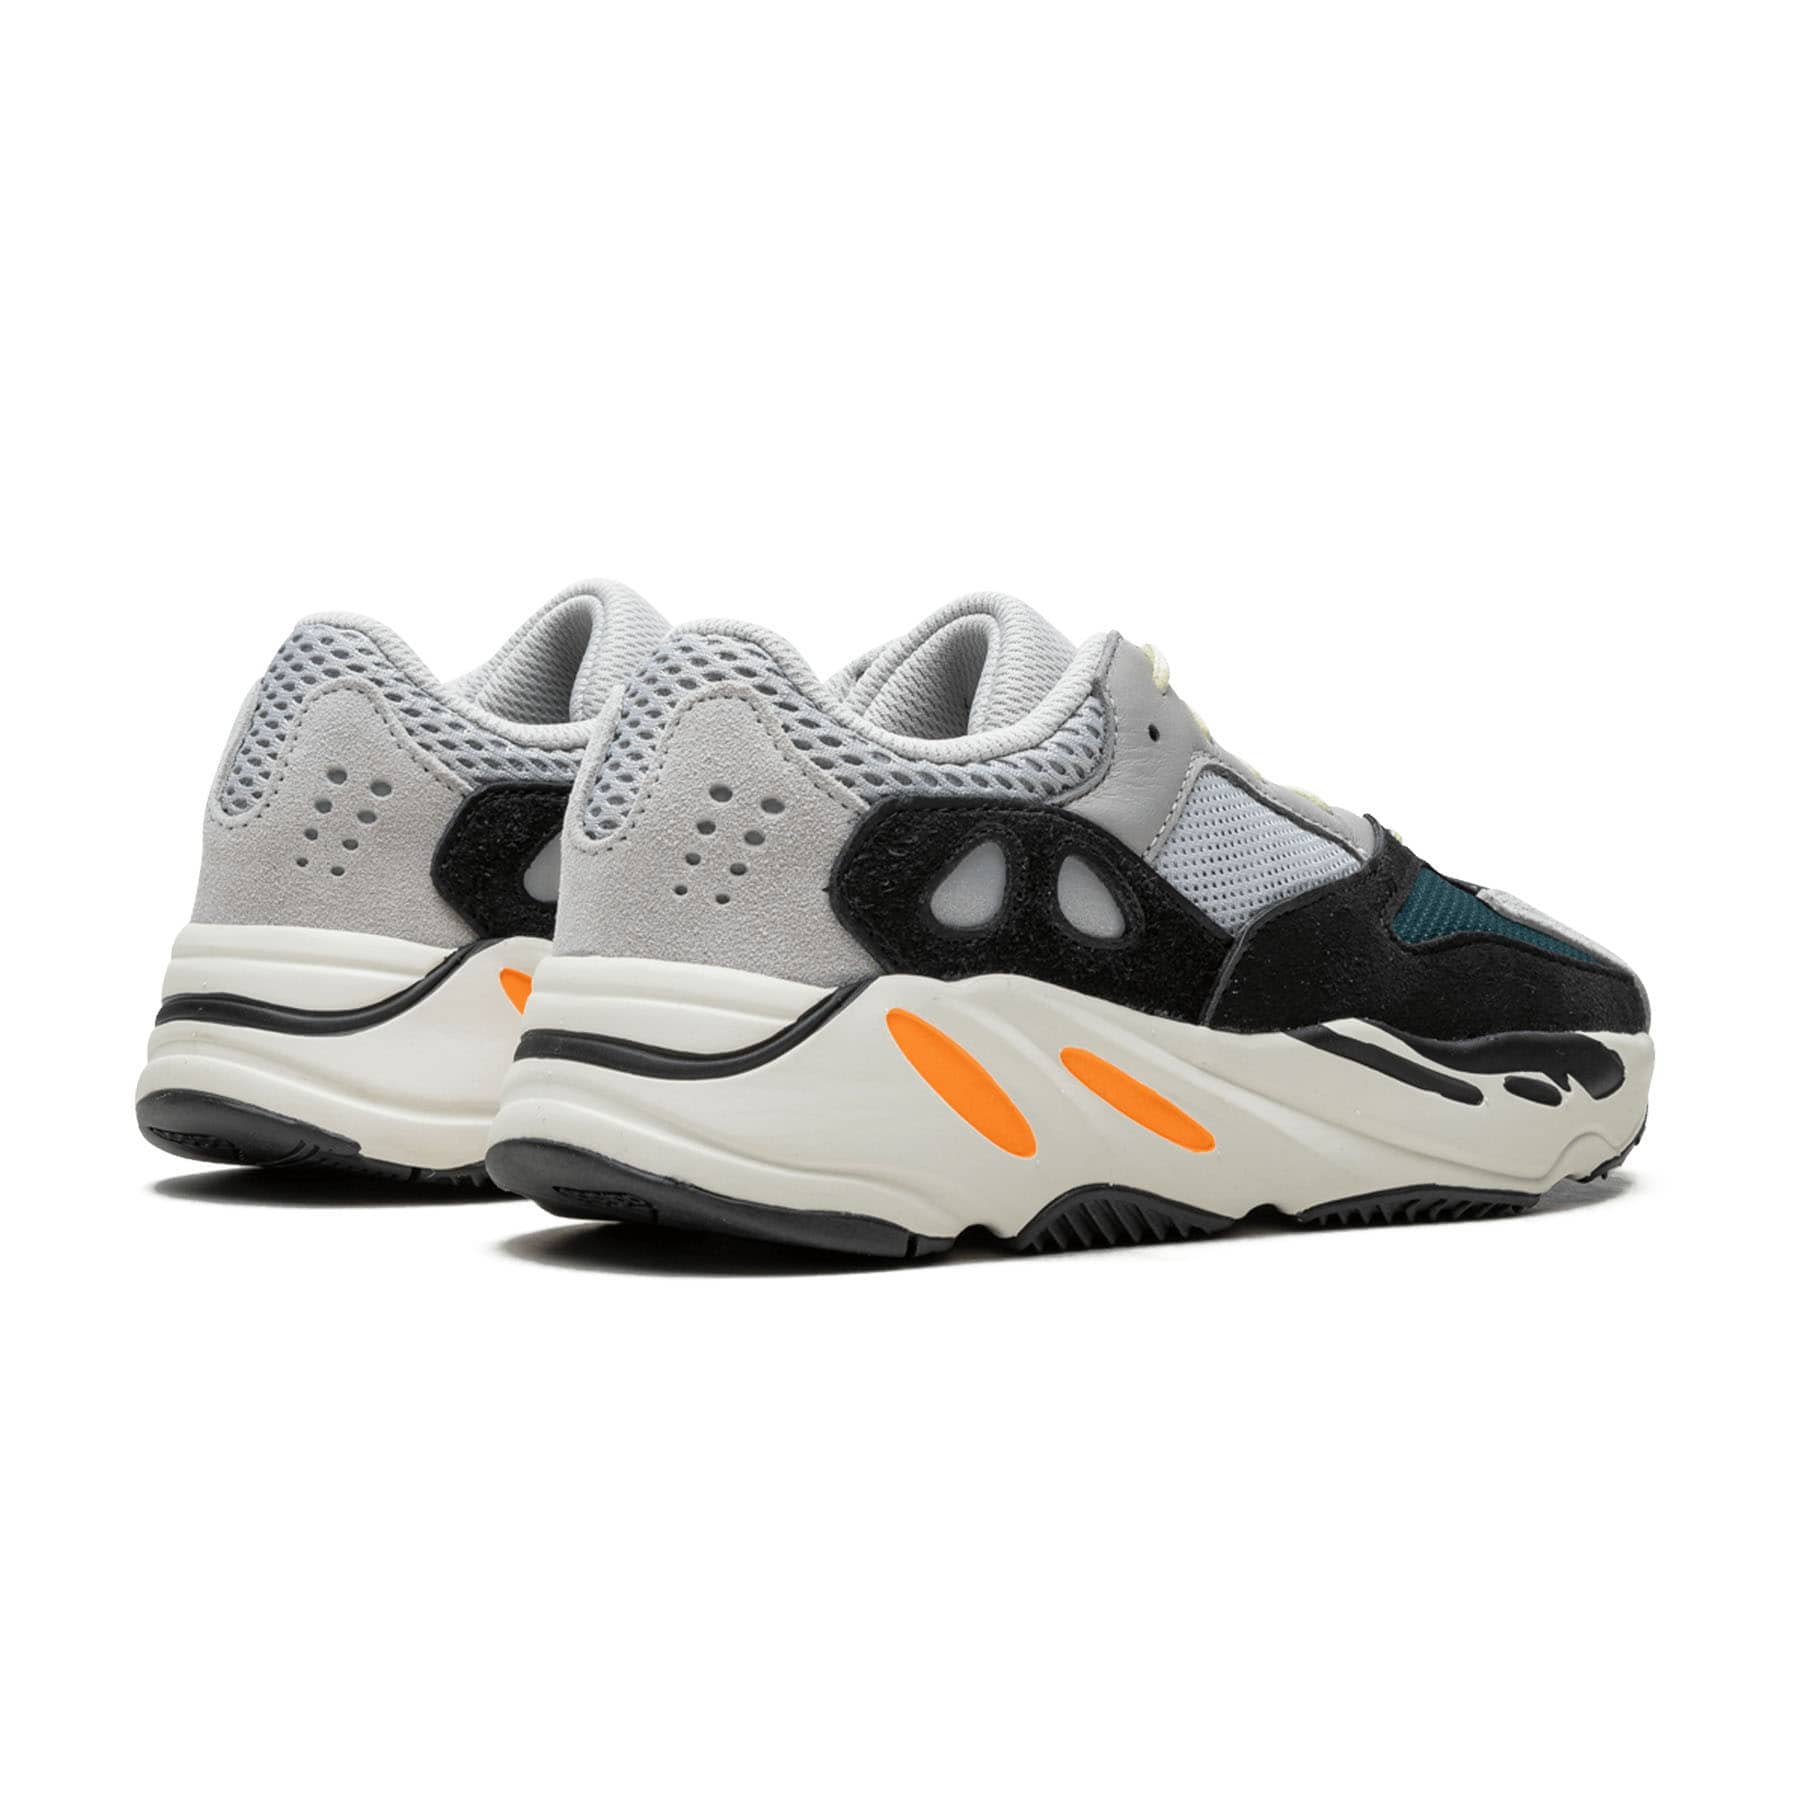 YEEZY BOOST 700 ADULTS MULTI SOLID